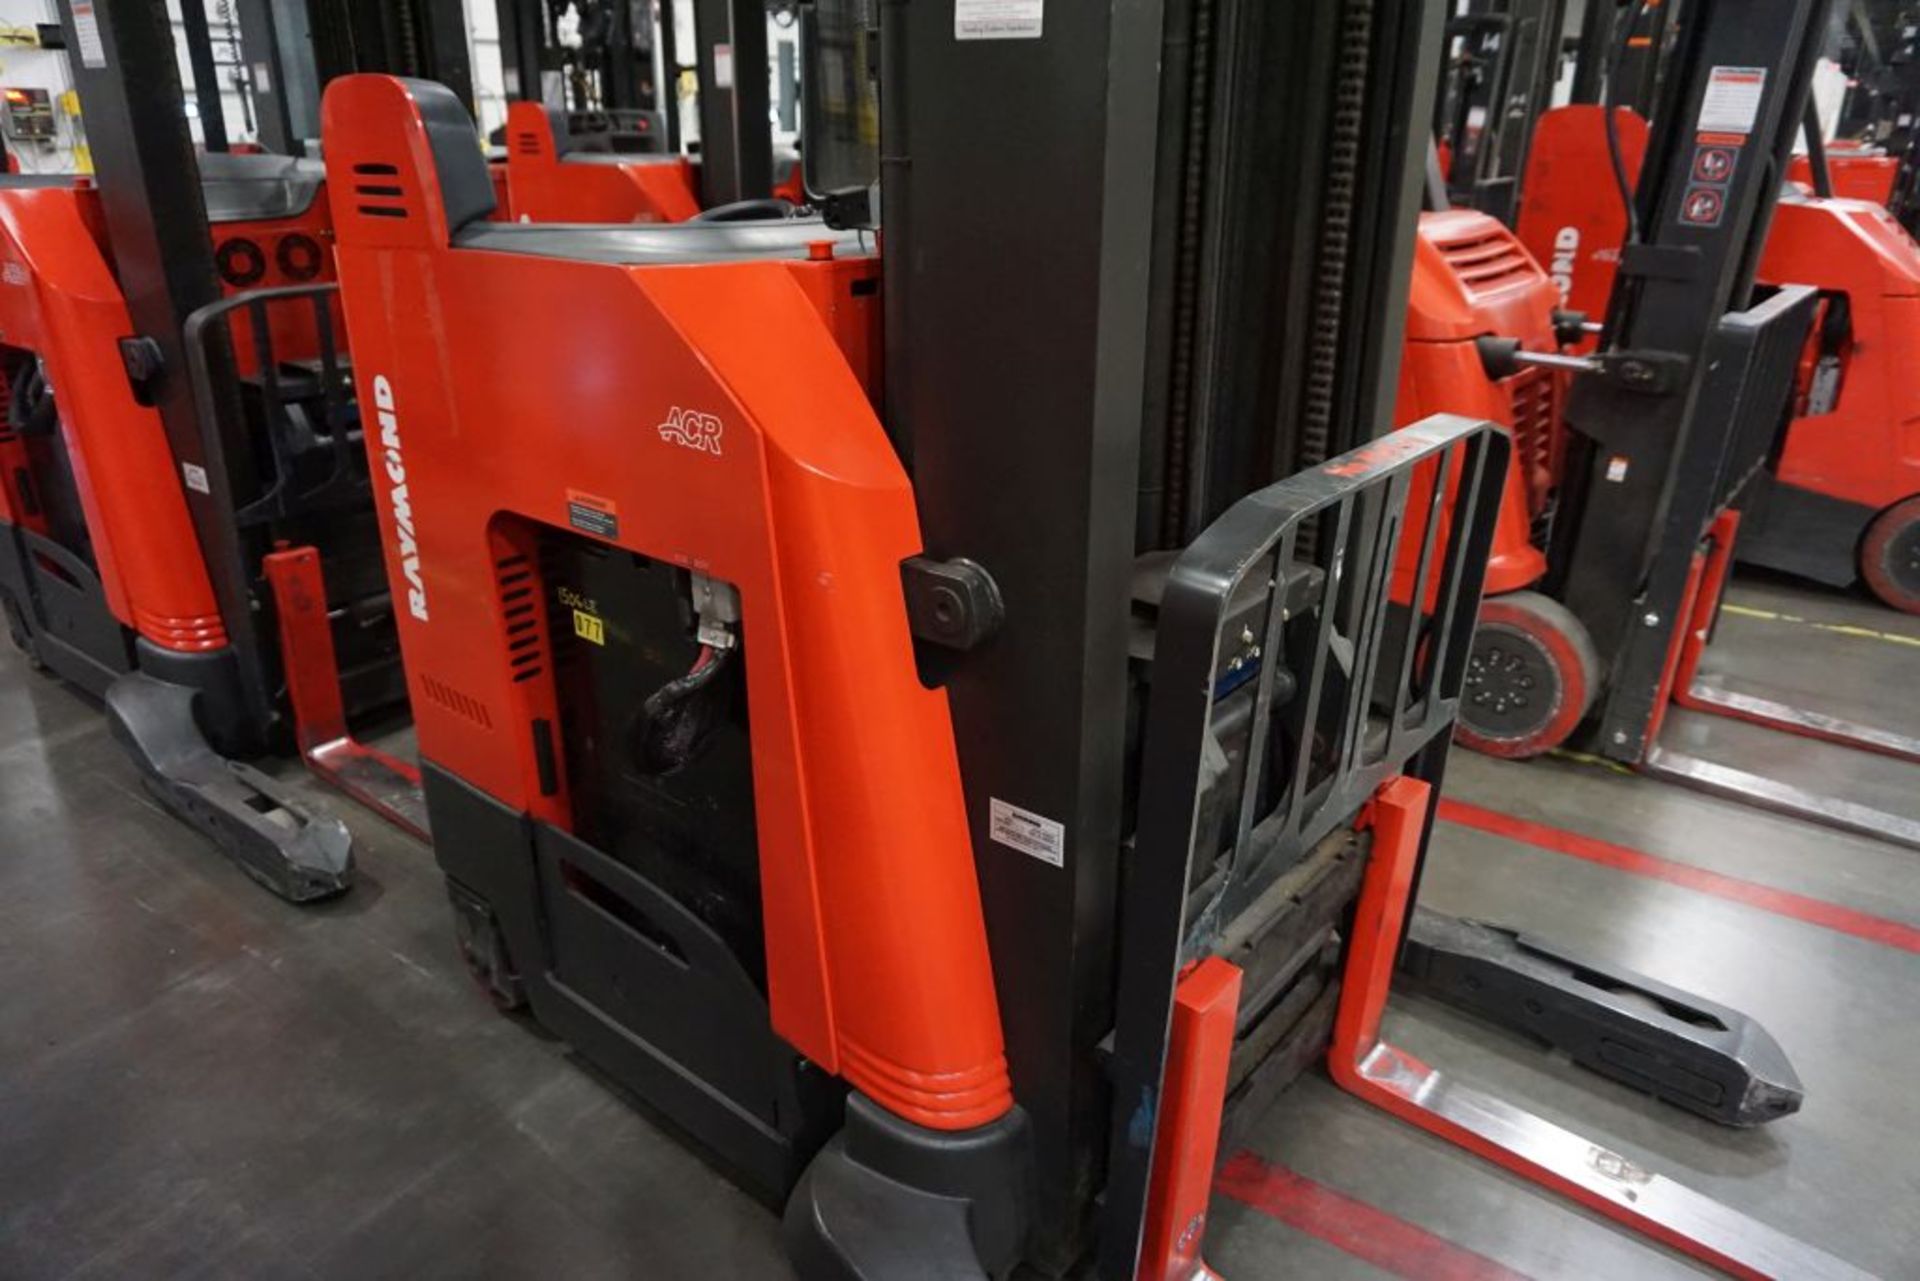 Raymond 7500 Universal Stance Reach Forklift - Model No. 750-R45TT; Serial No. 750-15-BC50725; - Image 5 of 19